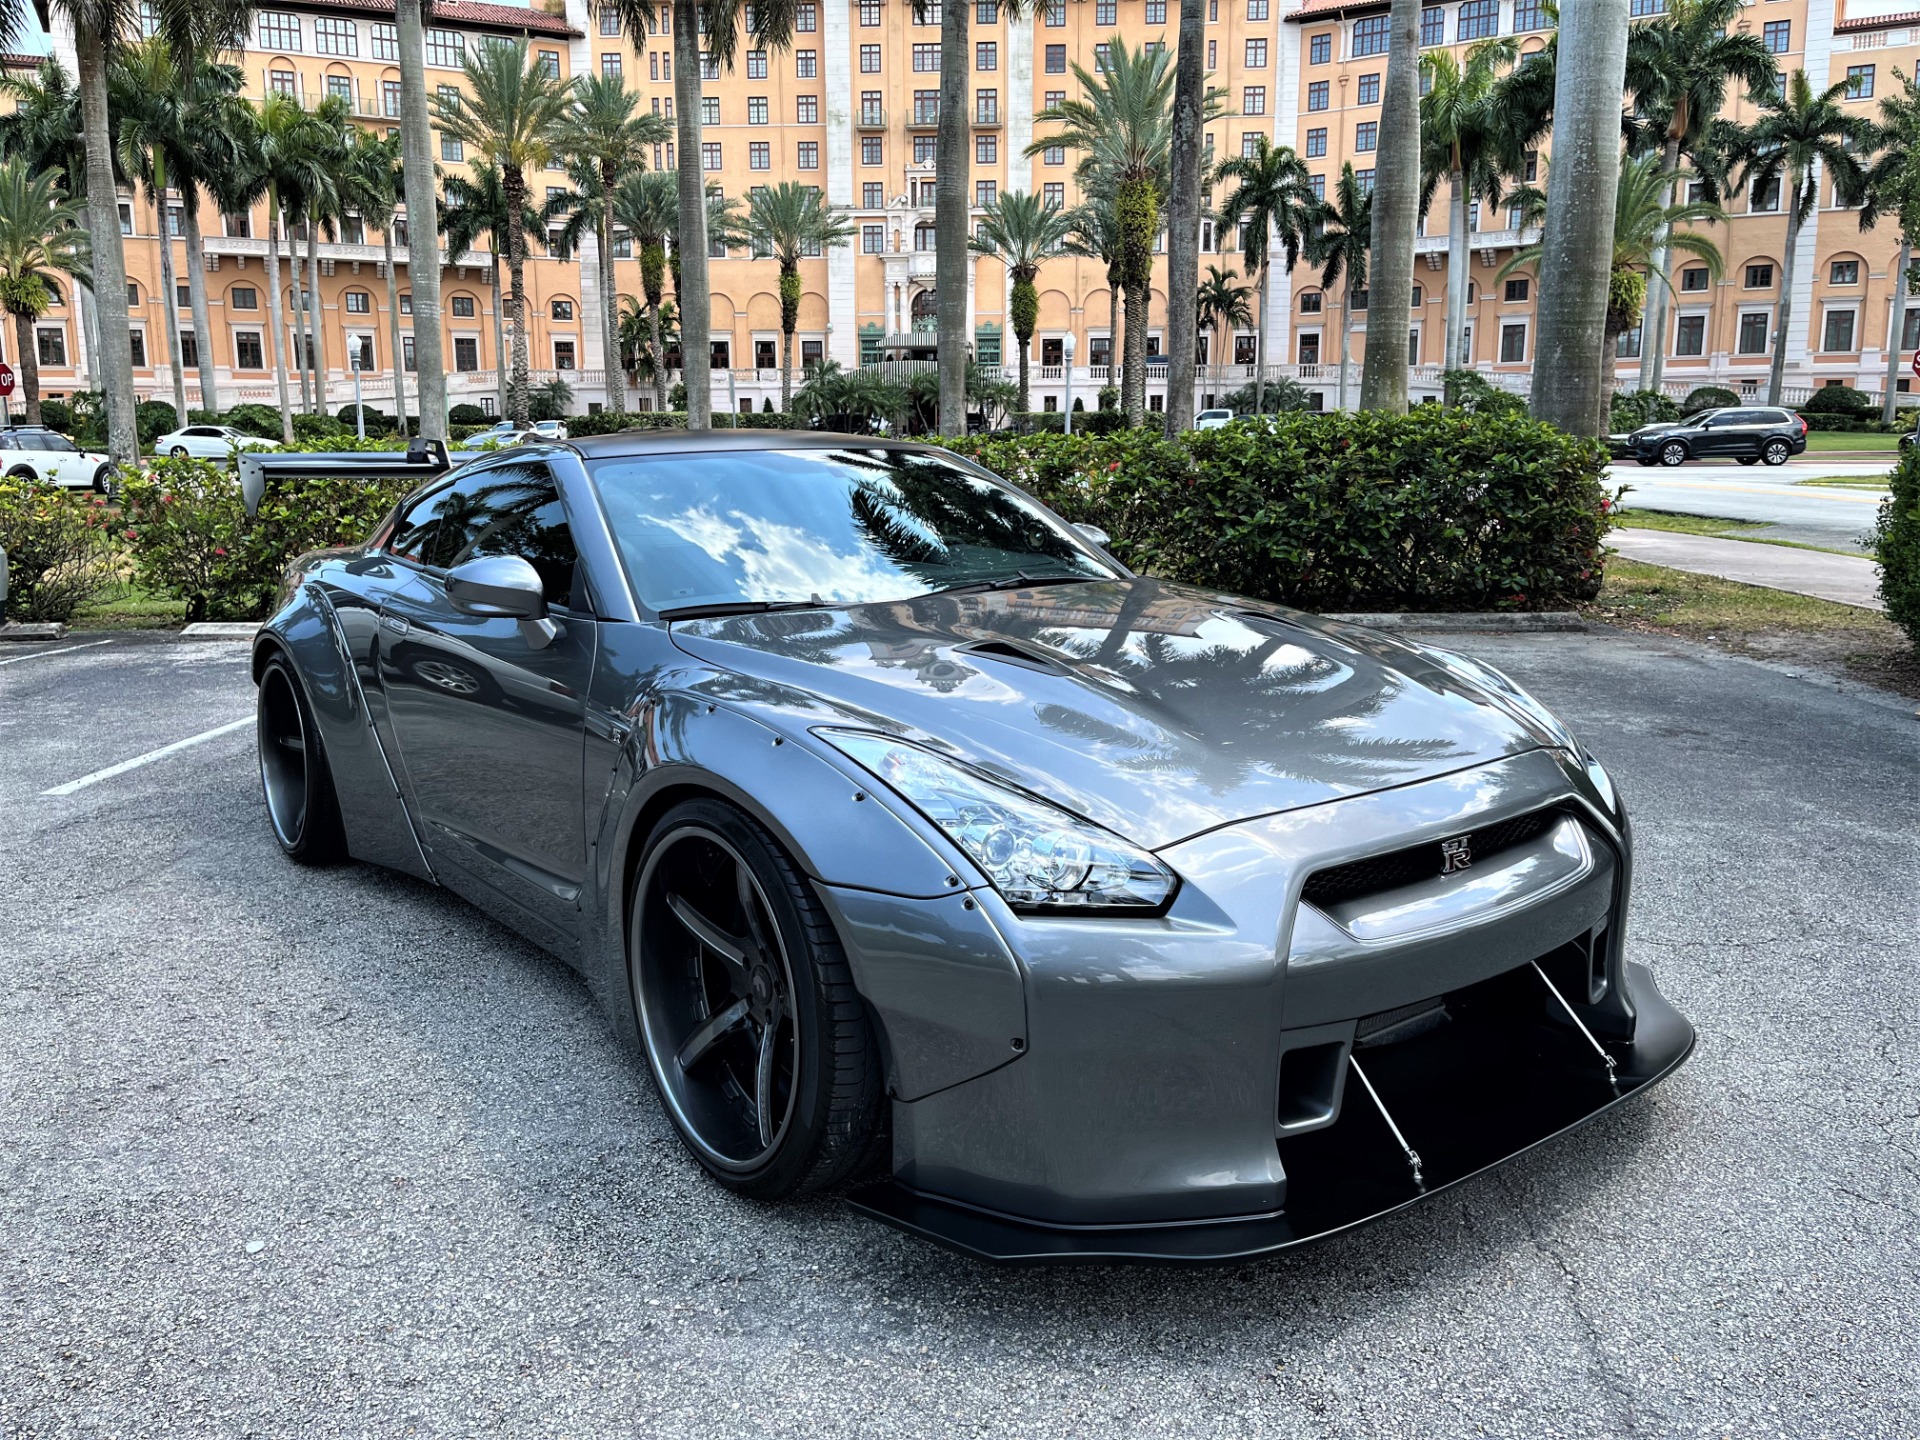 Used 2014 Nissan GT-R Track Edition for sale Sold at The Gables Sports Cars in Miami FL 33146 3